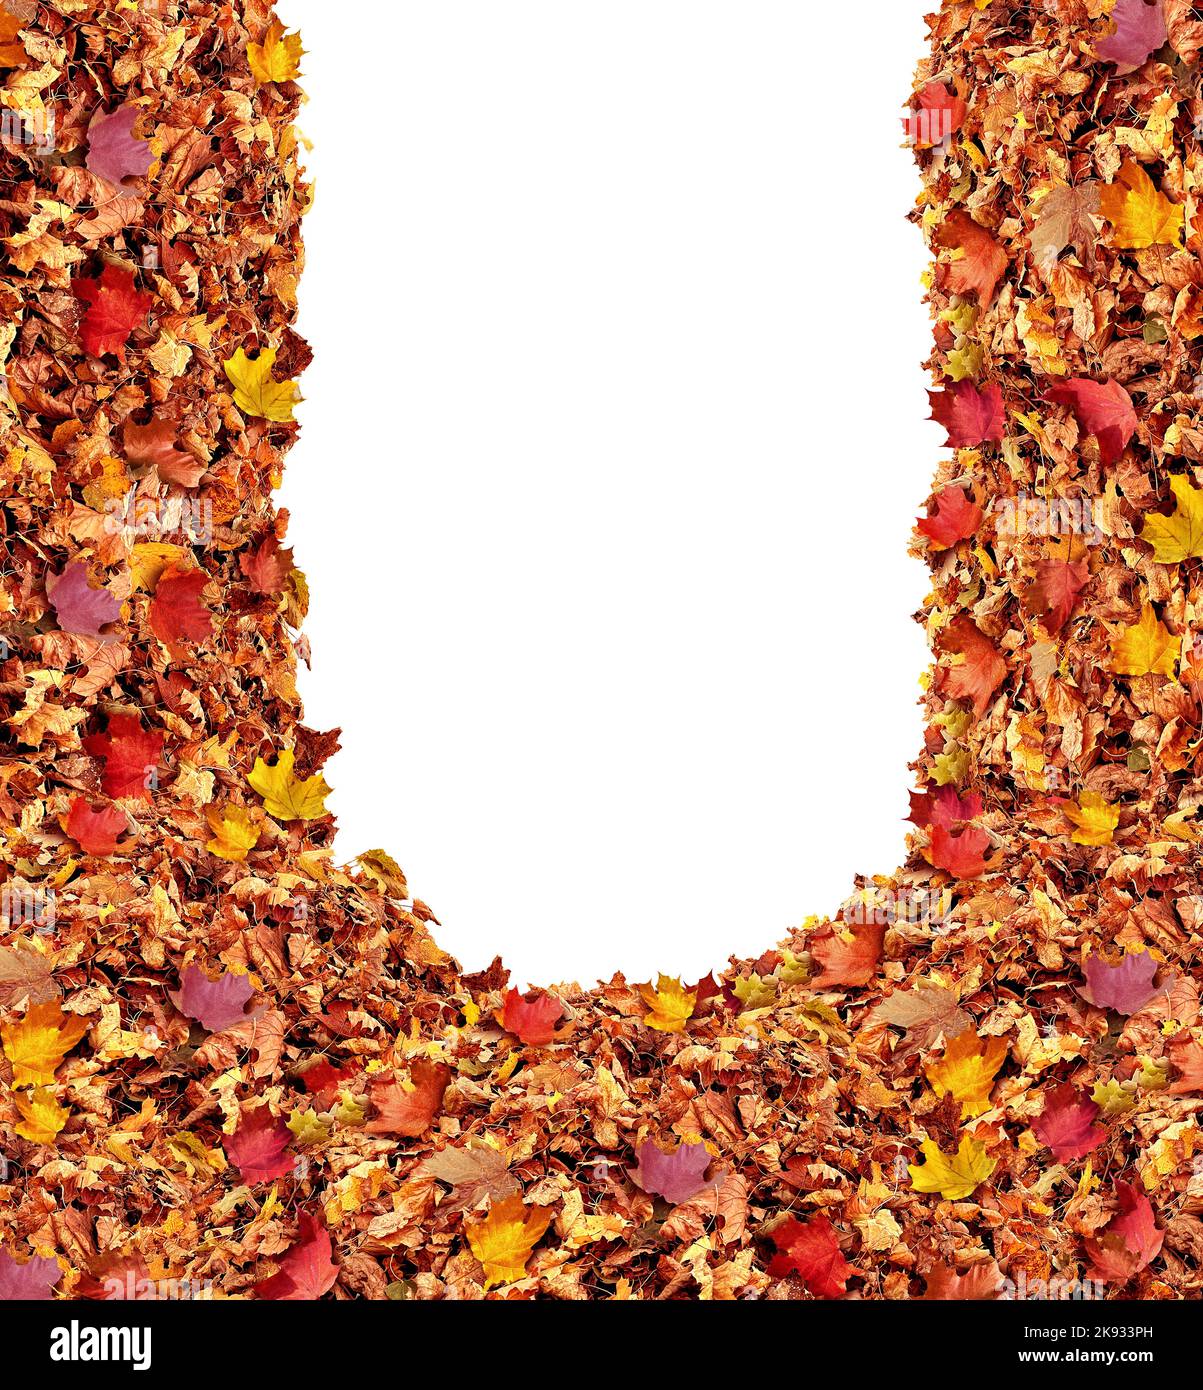 Pile Of Autumn Leaves as fall season leaf hill as a seasonal nature symbol for September October and Novmber blank frame with a white isolated. Stock Photo